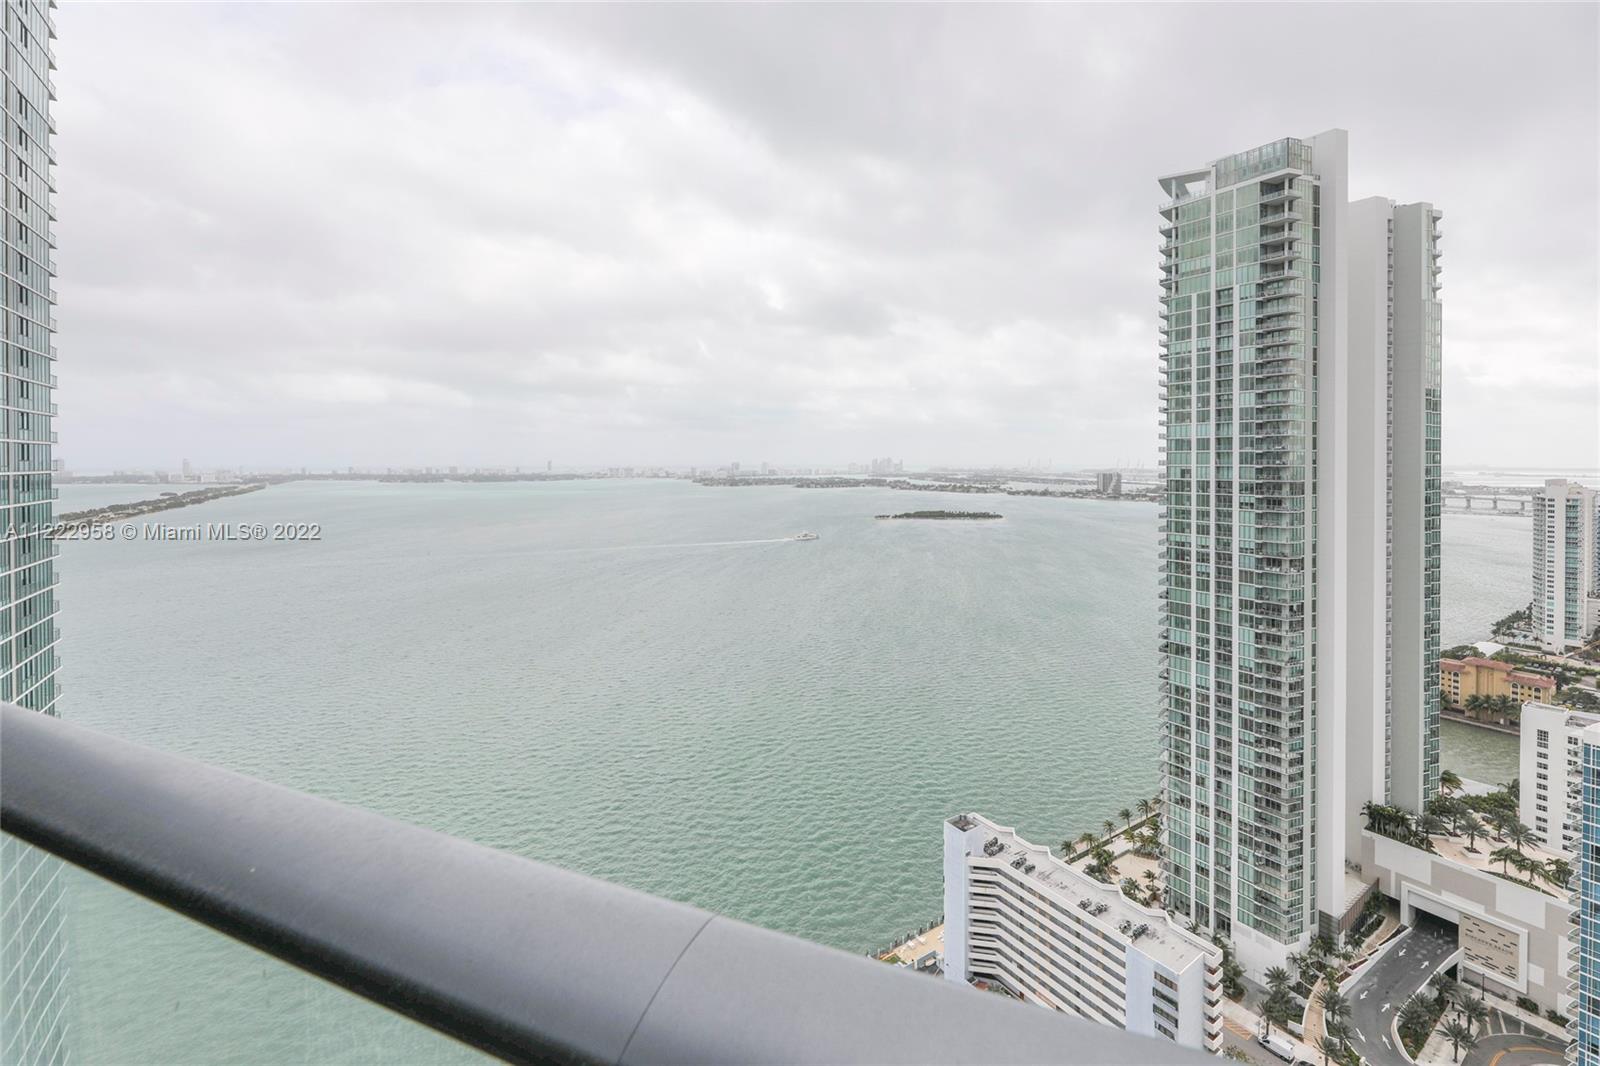 Beautiful 4 en-suite bedrooms & 4.5 bathrooms at the beautiful Paraiso Bay. Residence features floor to ceiling windows throughout so you can enjoy direct & unobstructed water views of the Biscayne Bay, the sunset & city lights! Private elevator & foyer entrance into your open kitchen and living room space. Must See! Currently has a tenant until November 30, 2022.